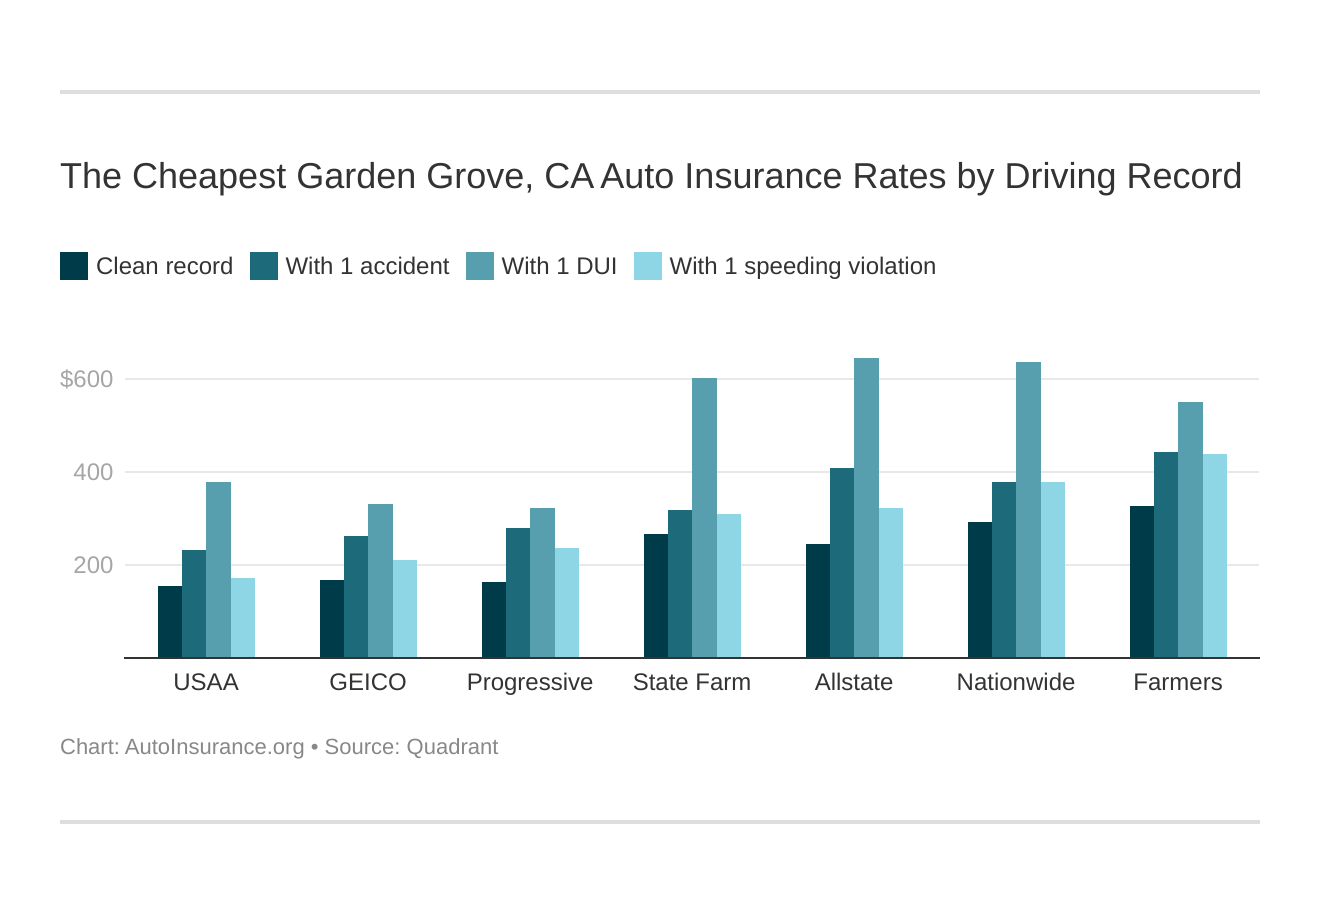 The Cheapest Garden Grove, CA Auto Insurance Rates by Driving Record